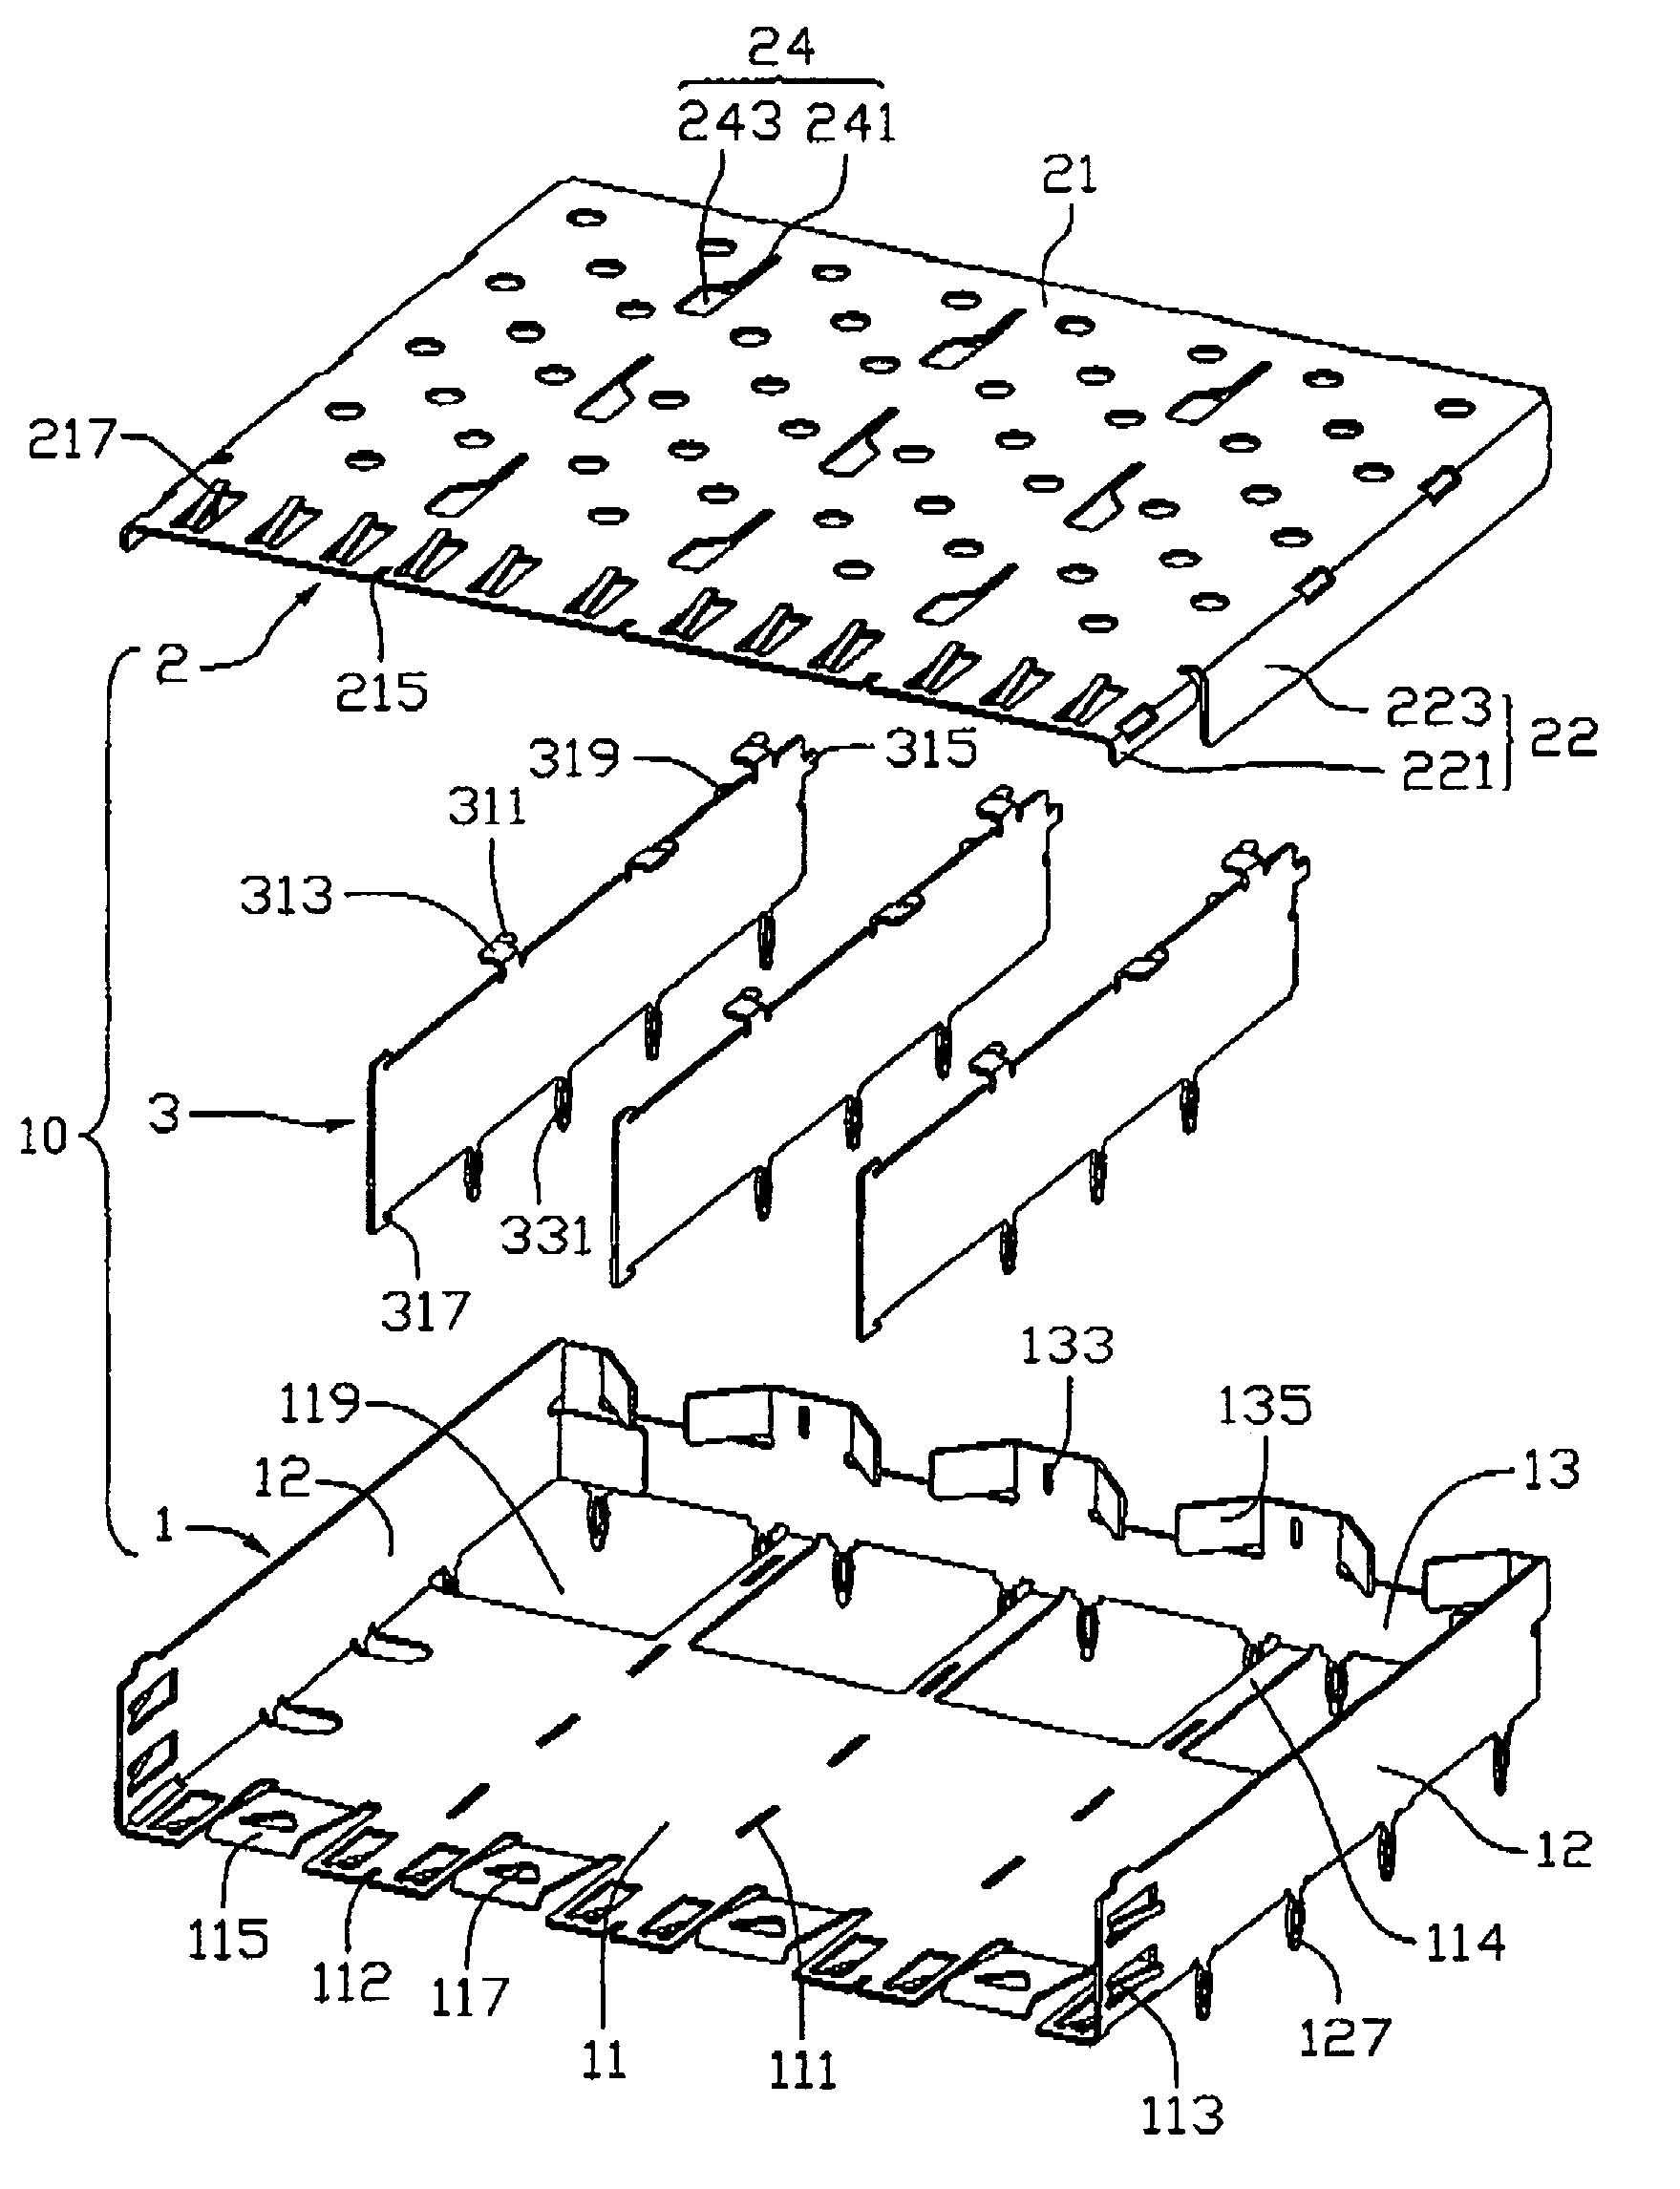 Shielding cage assembly with reinforcing dividing walls